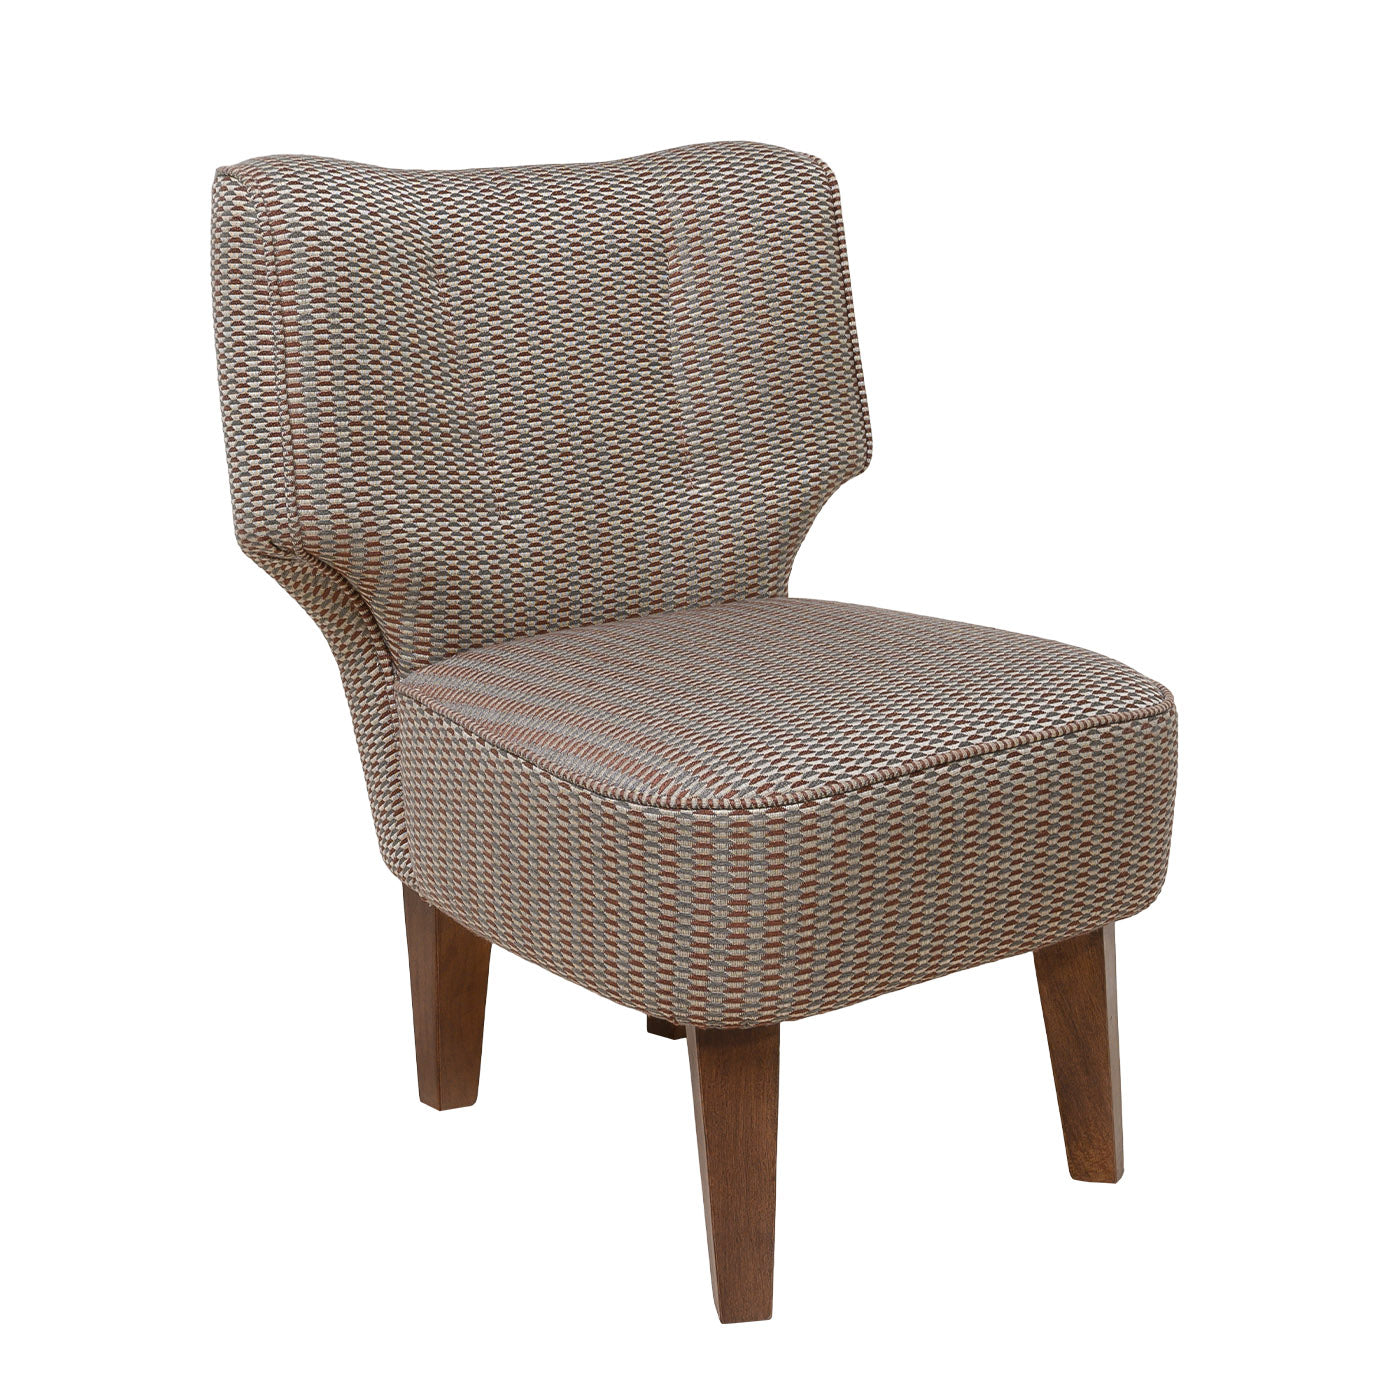 Mimosa Geometric-Patterned Chair - Alternative view 4